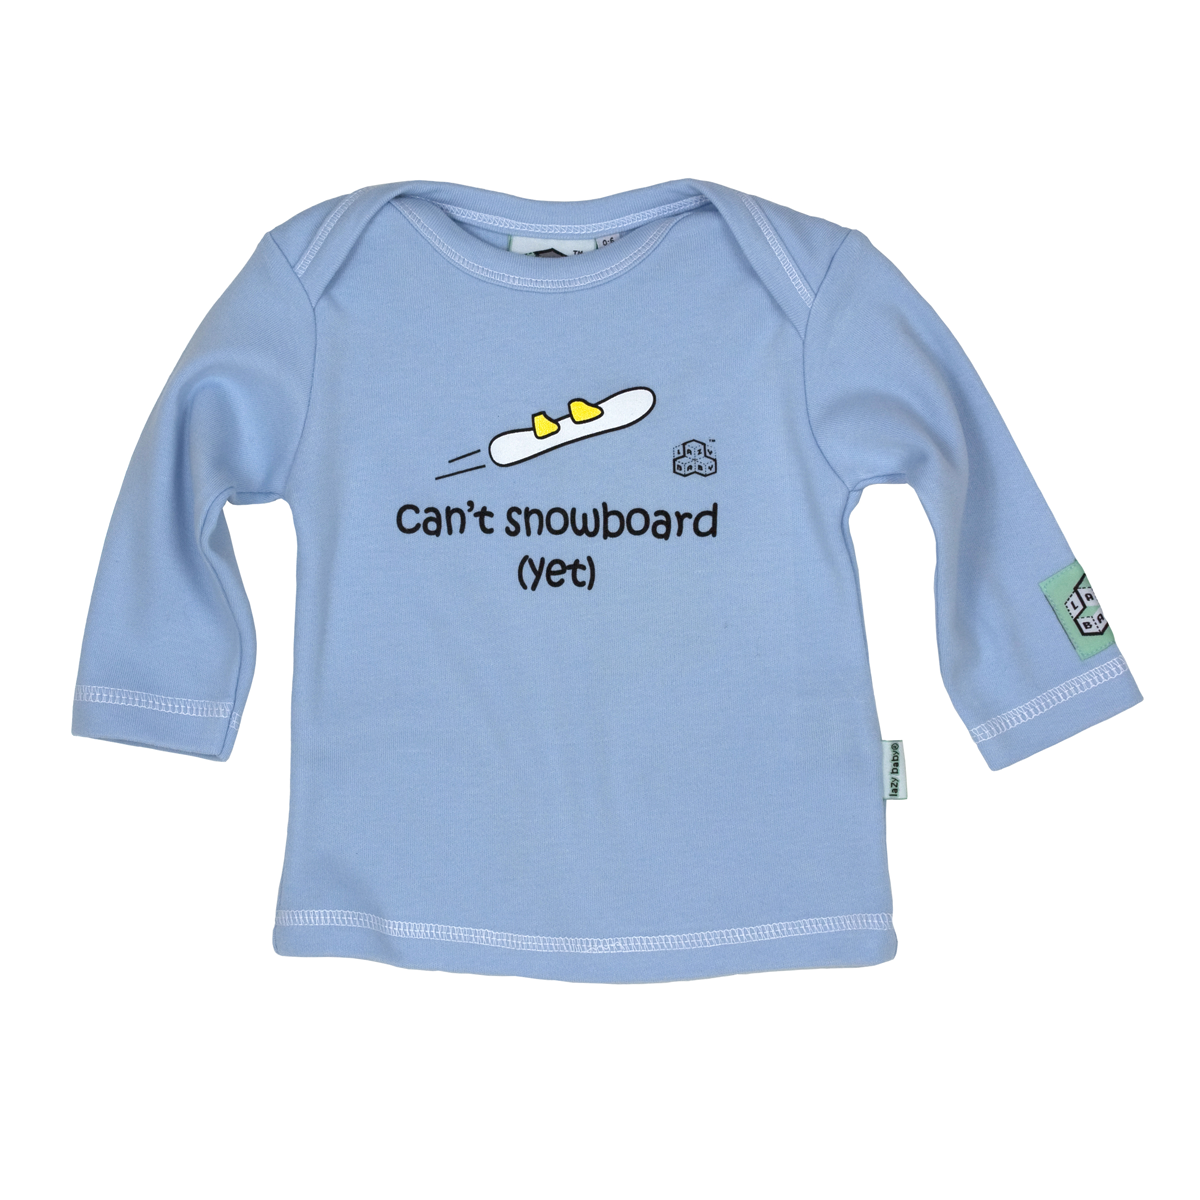 Blue long sleeve t-shirt featuring can't snowboard yet slogan and image of feet on snowboard